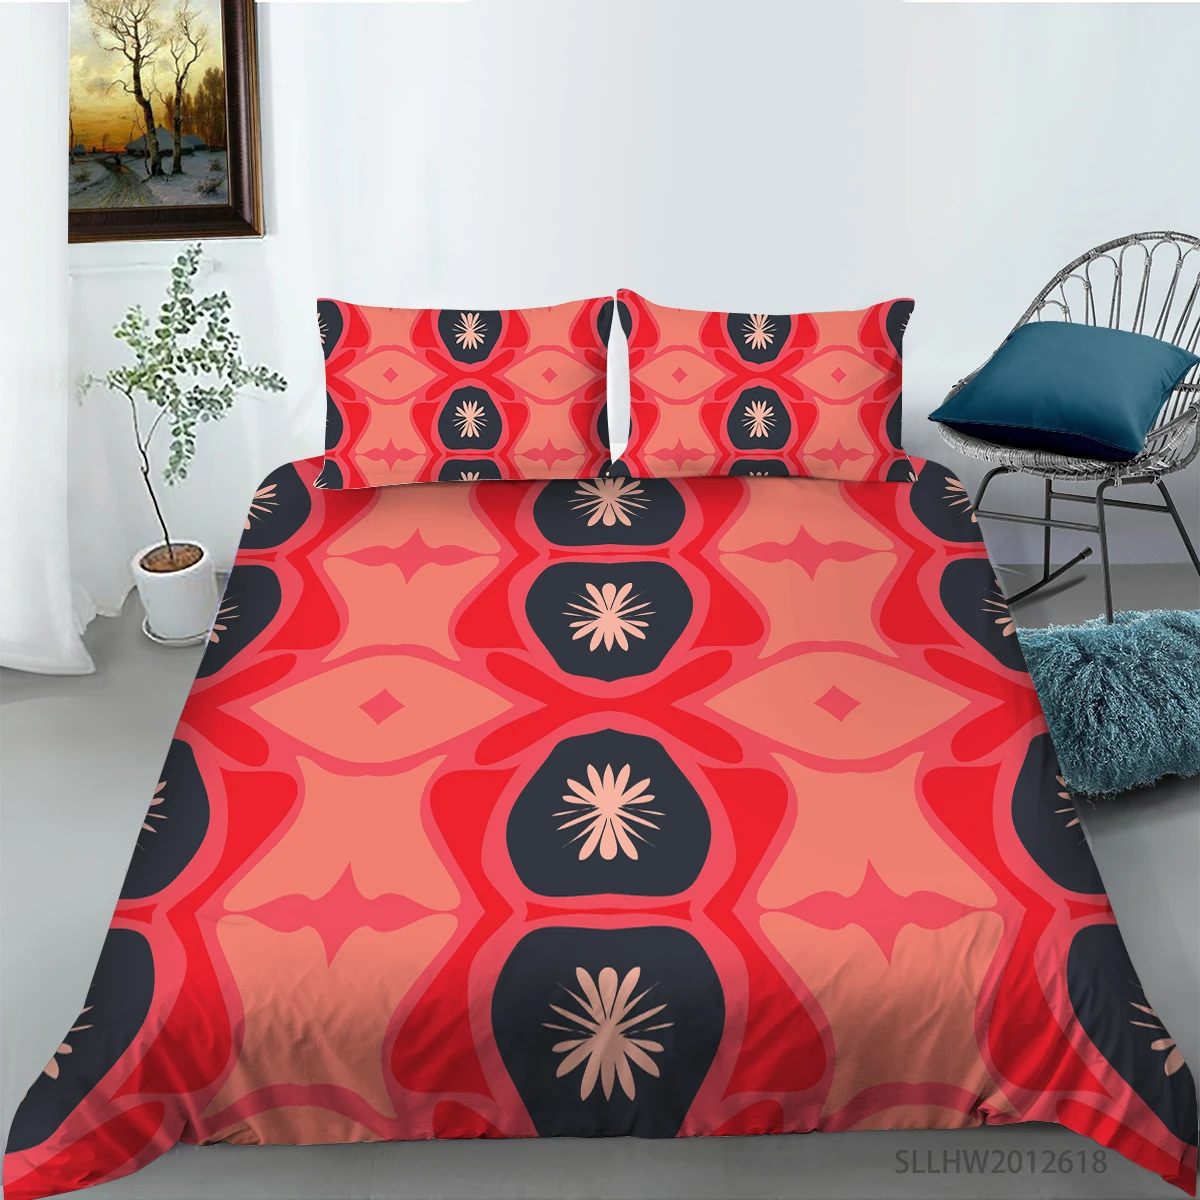 

Red Vintage Bohemian Single King Queen Size Bedding Sets Boho Mandala Quilt Comforter Duvet Cover with pillowcases 2/3pcs